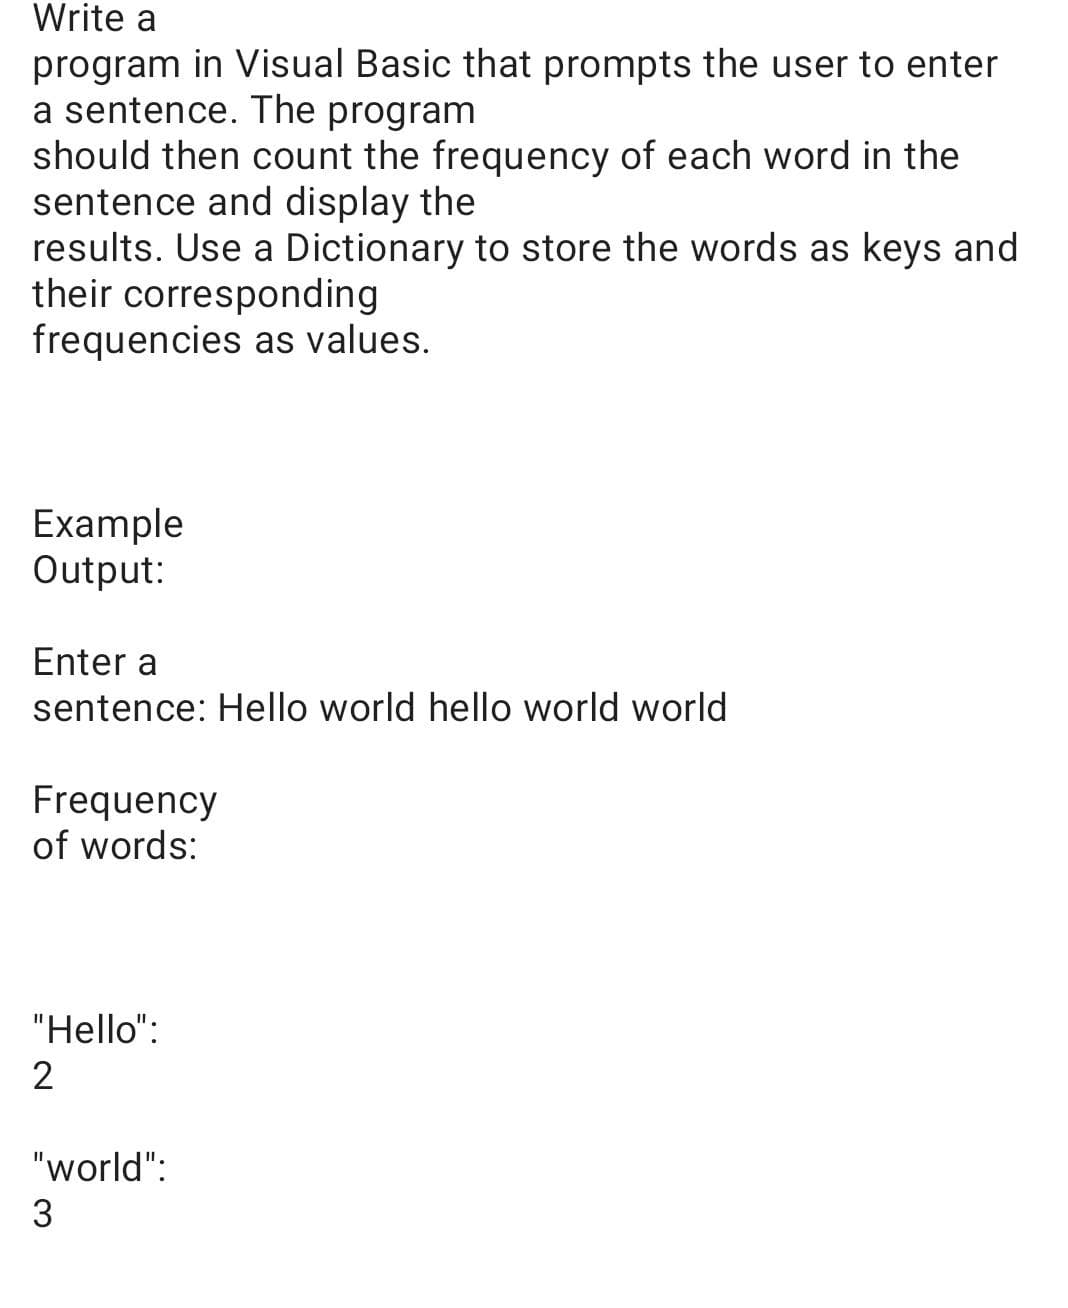 Write a
program in Visual Basic that prompts the user to enter
a sentence. The program
should then count the frequency of each word in the
sentence and display the
results. Use a Dictionary to store the words as keys and
their corresponding
frequencies as values.
Example
Output:
Enter a
sentence: Hello world hello world world
Frequency
of words:
"Hello":
2
"world":
3